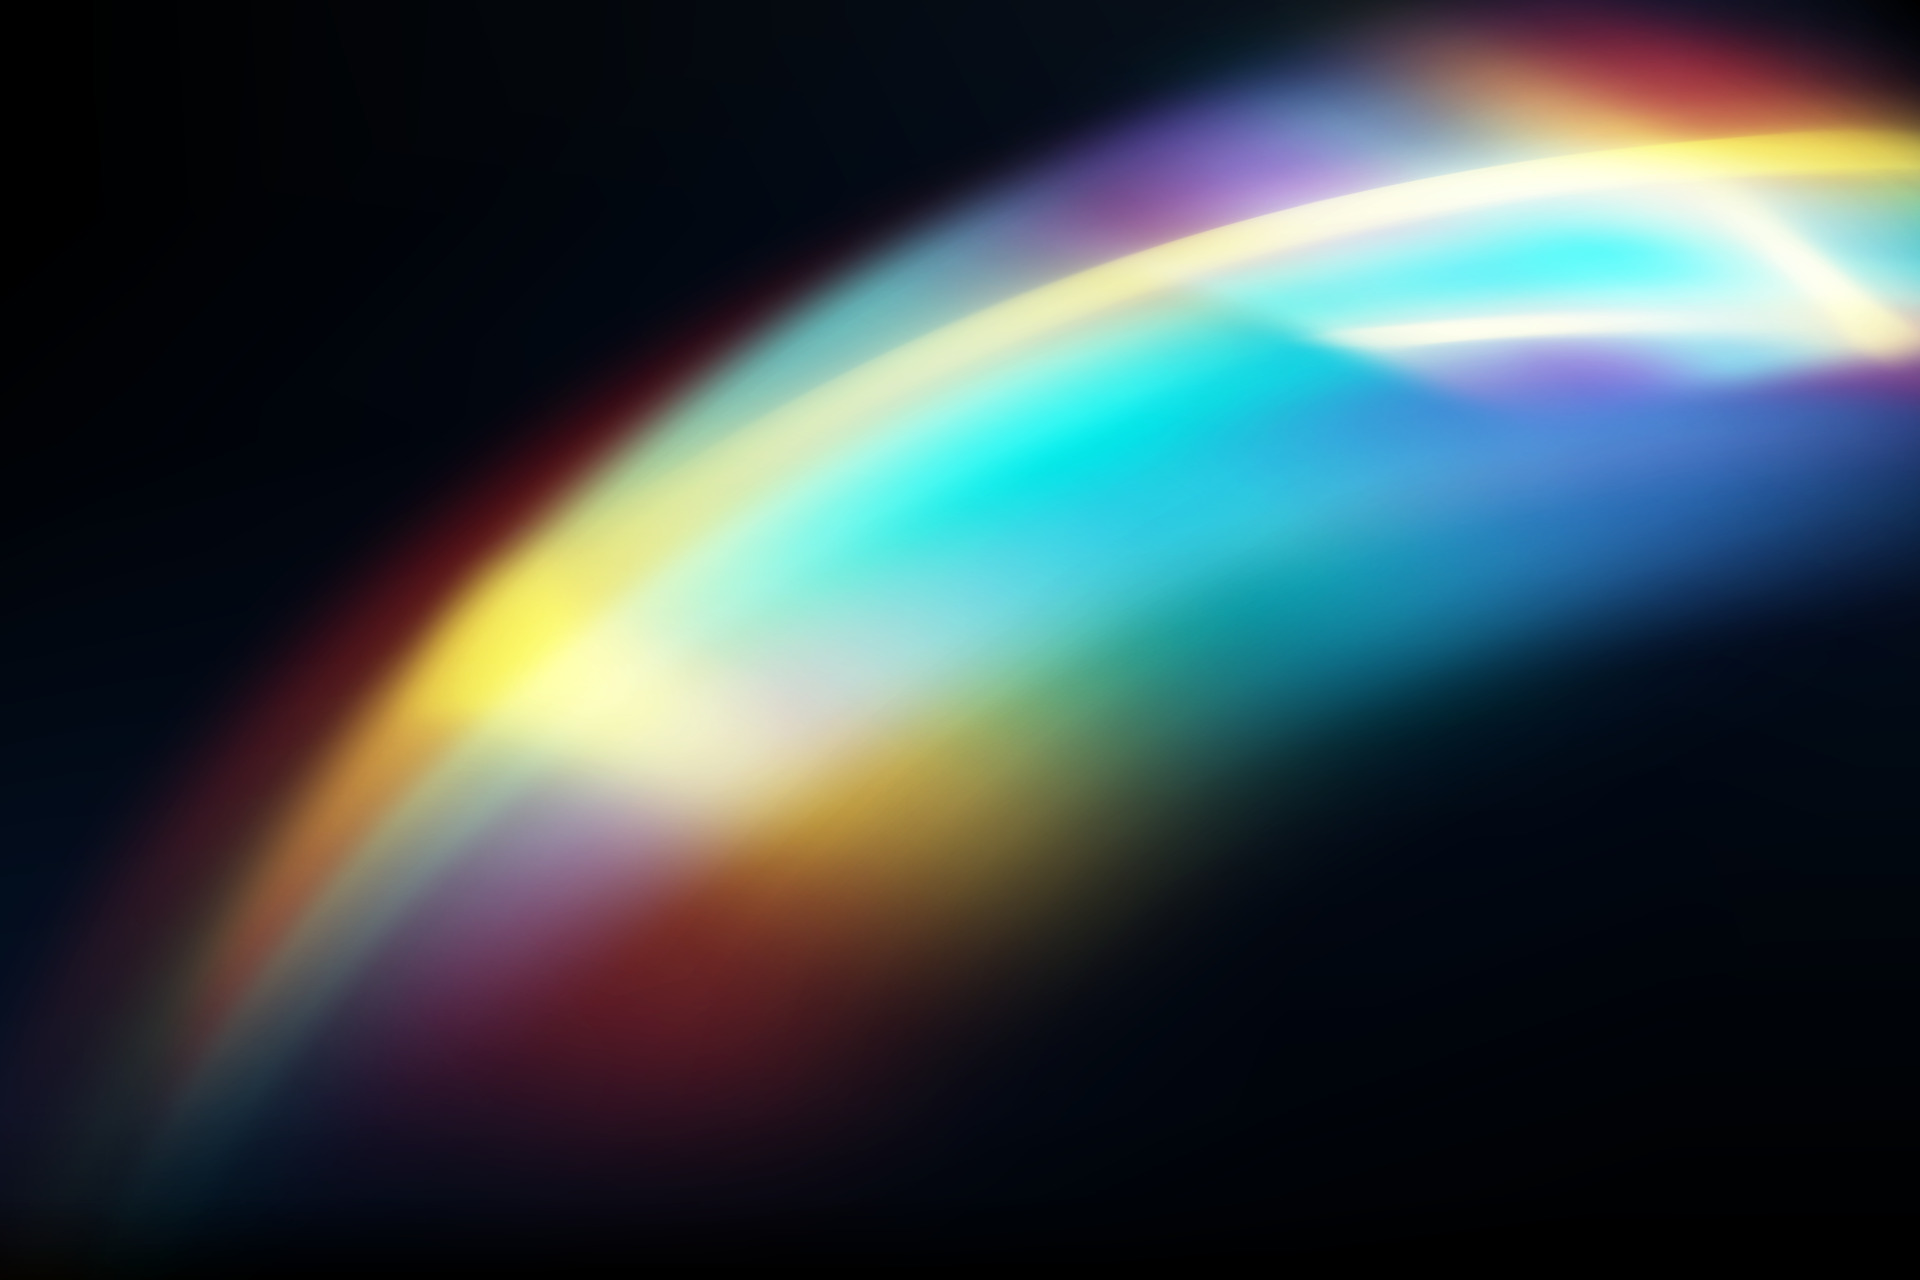 https://static.vecteezy.com/system/resources/previews/011/536/412/original/rainbow-highlights-on-a-black-background-glare-or-reflection-from-water-and-glass-glittering-particles-for-social-media-backgrounds-product-presentations-photo-shots-vector.jpg